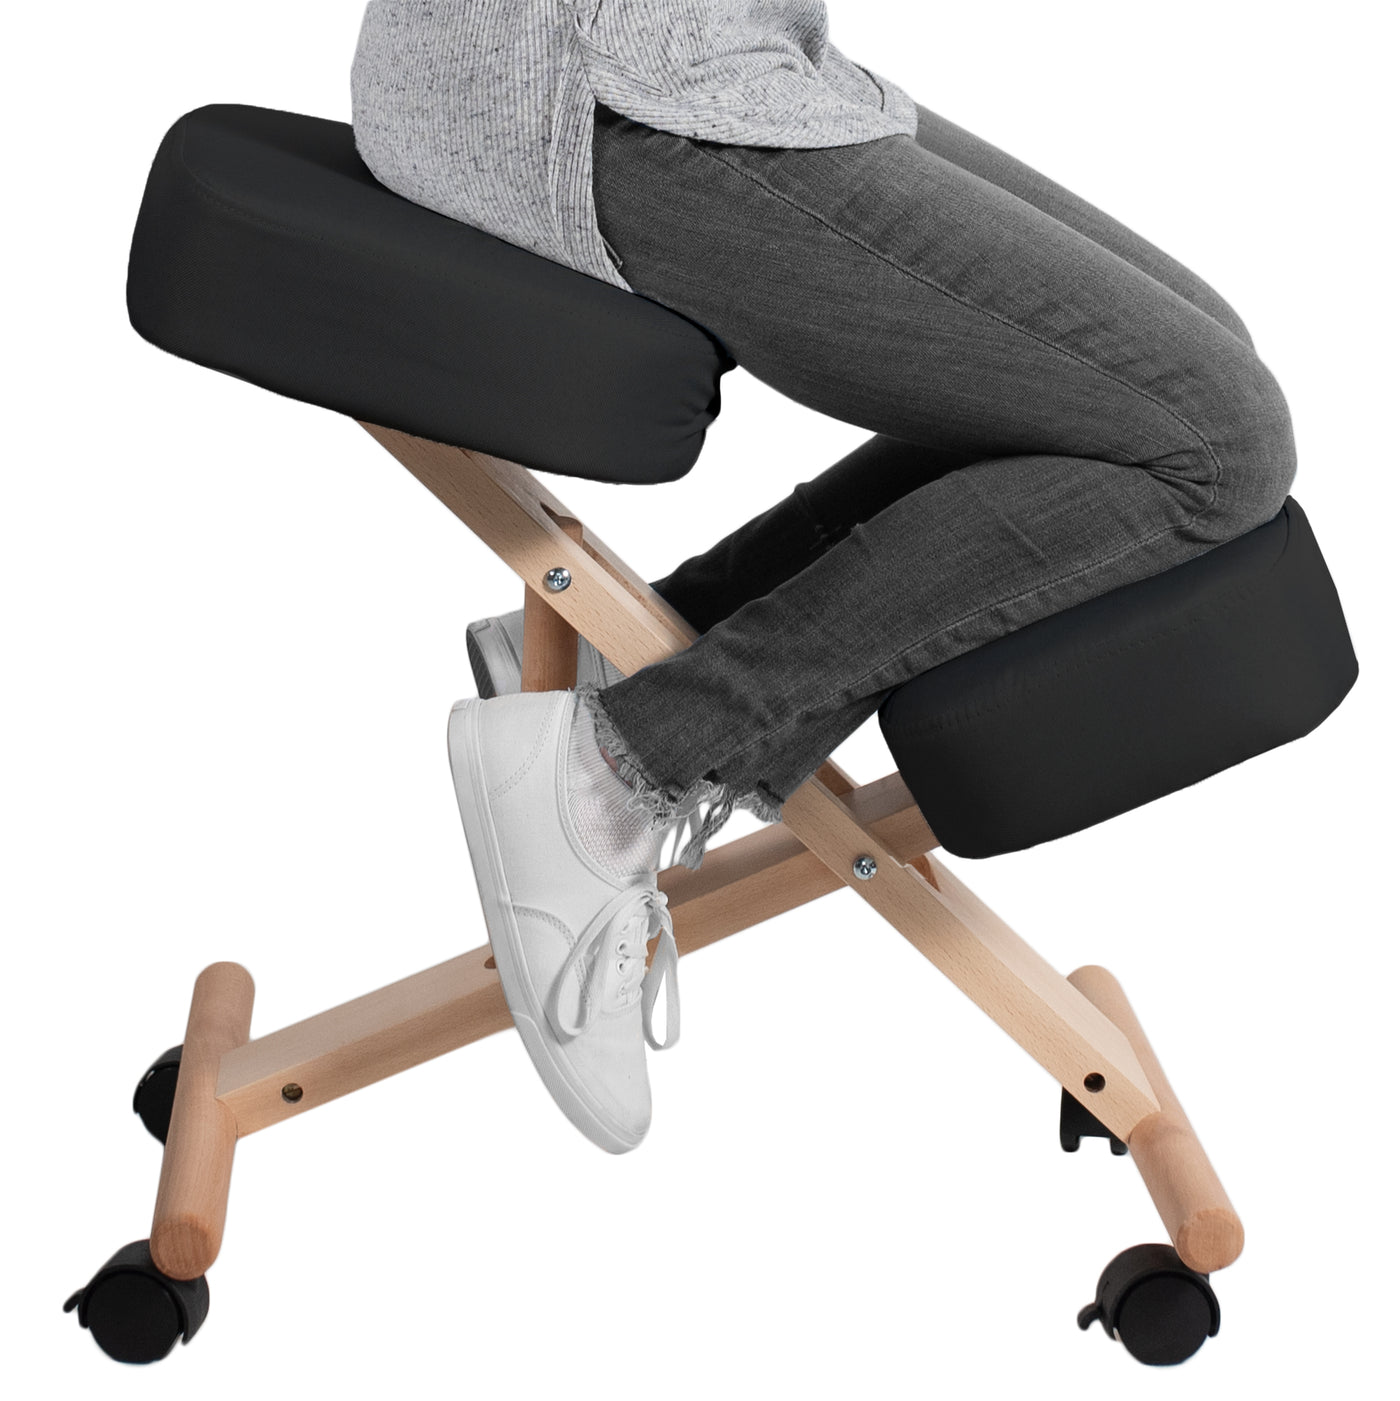 Wooden Kneeling Chair with Wheels – VIVO desk solutions, screen mounting,  and more